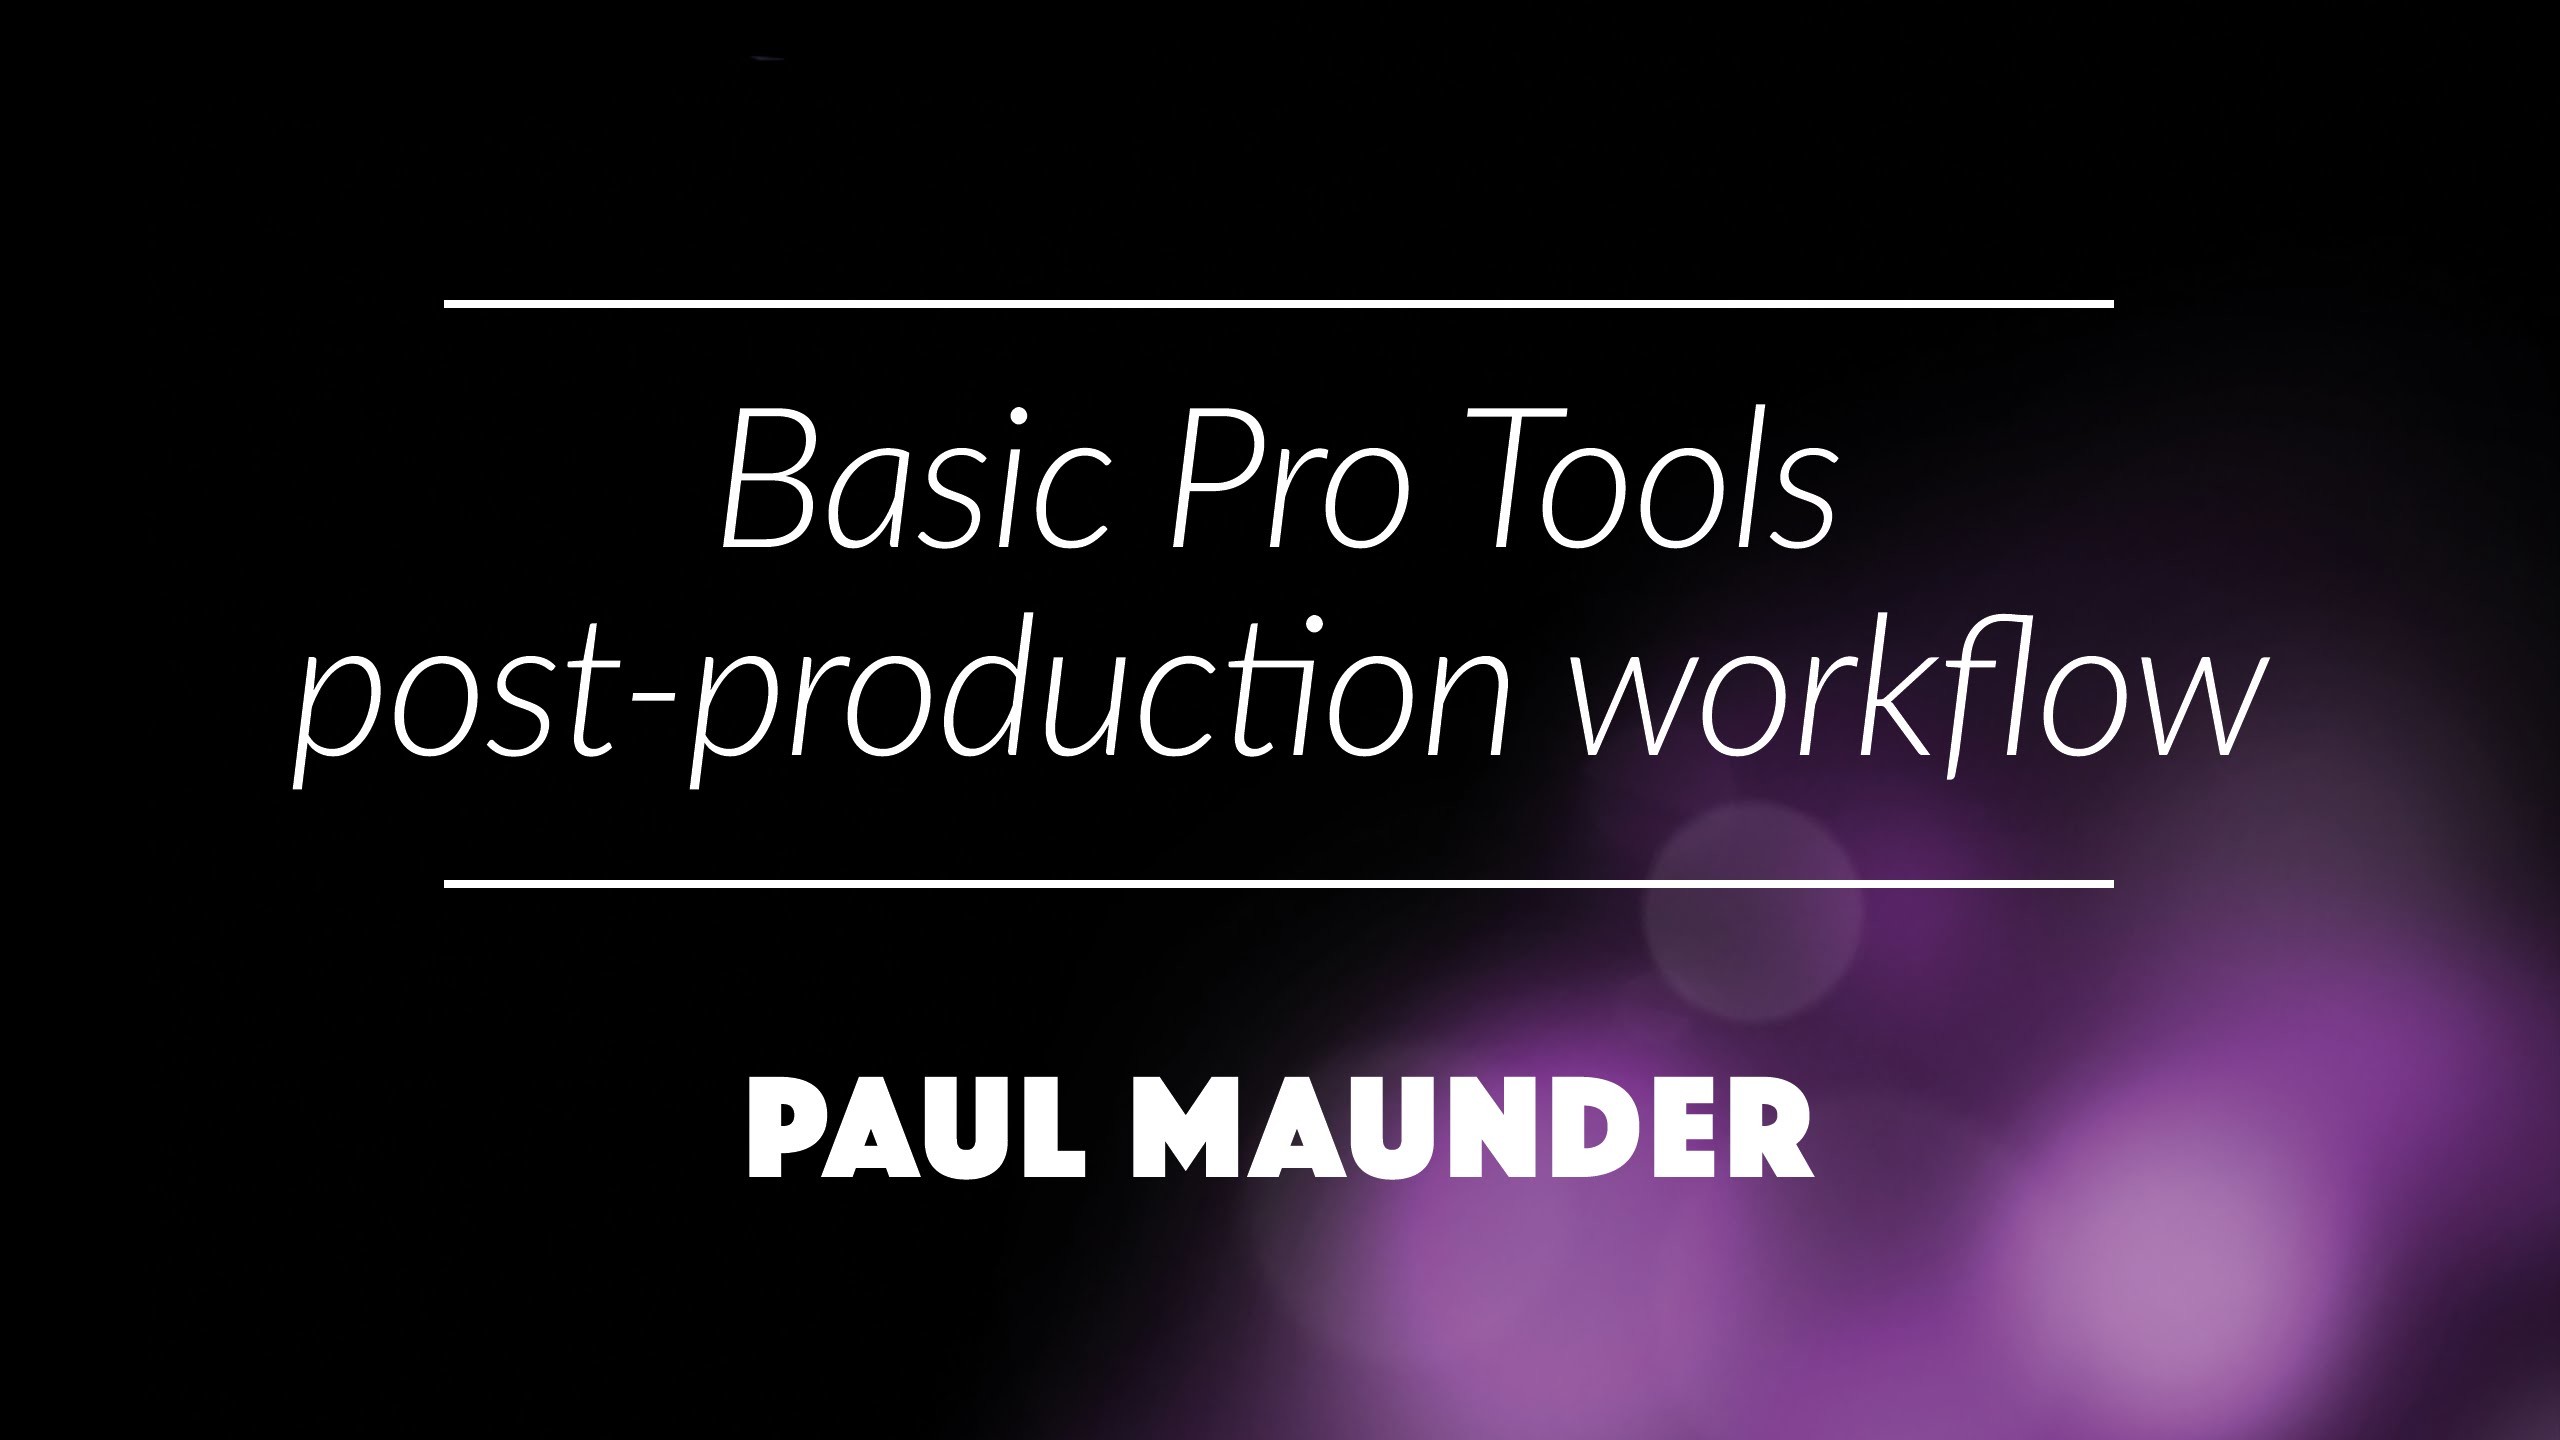 2560x1440 Basic Pro Tools Post Production Workflow